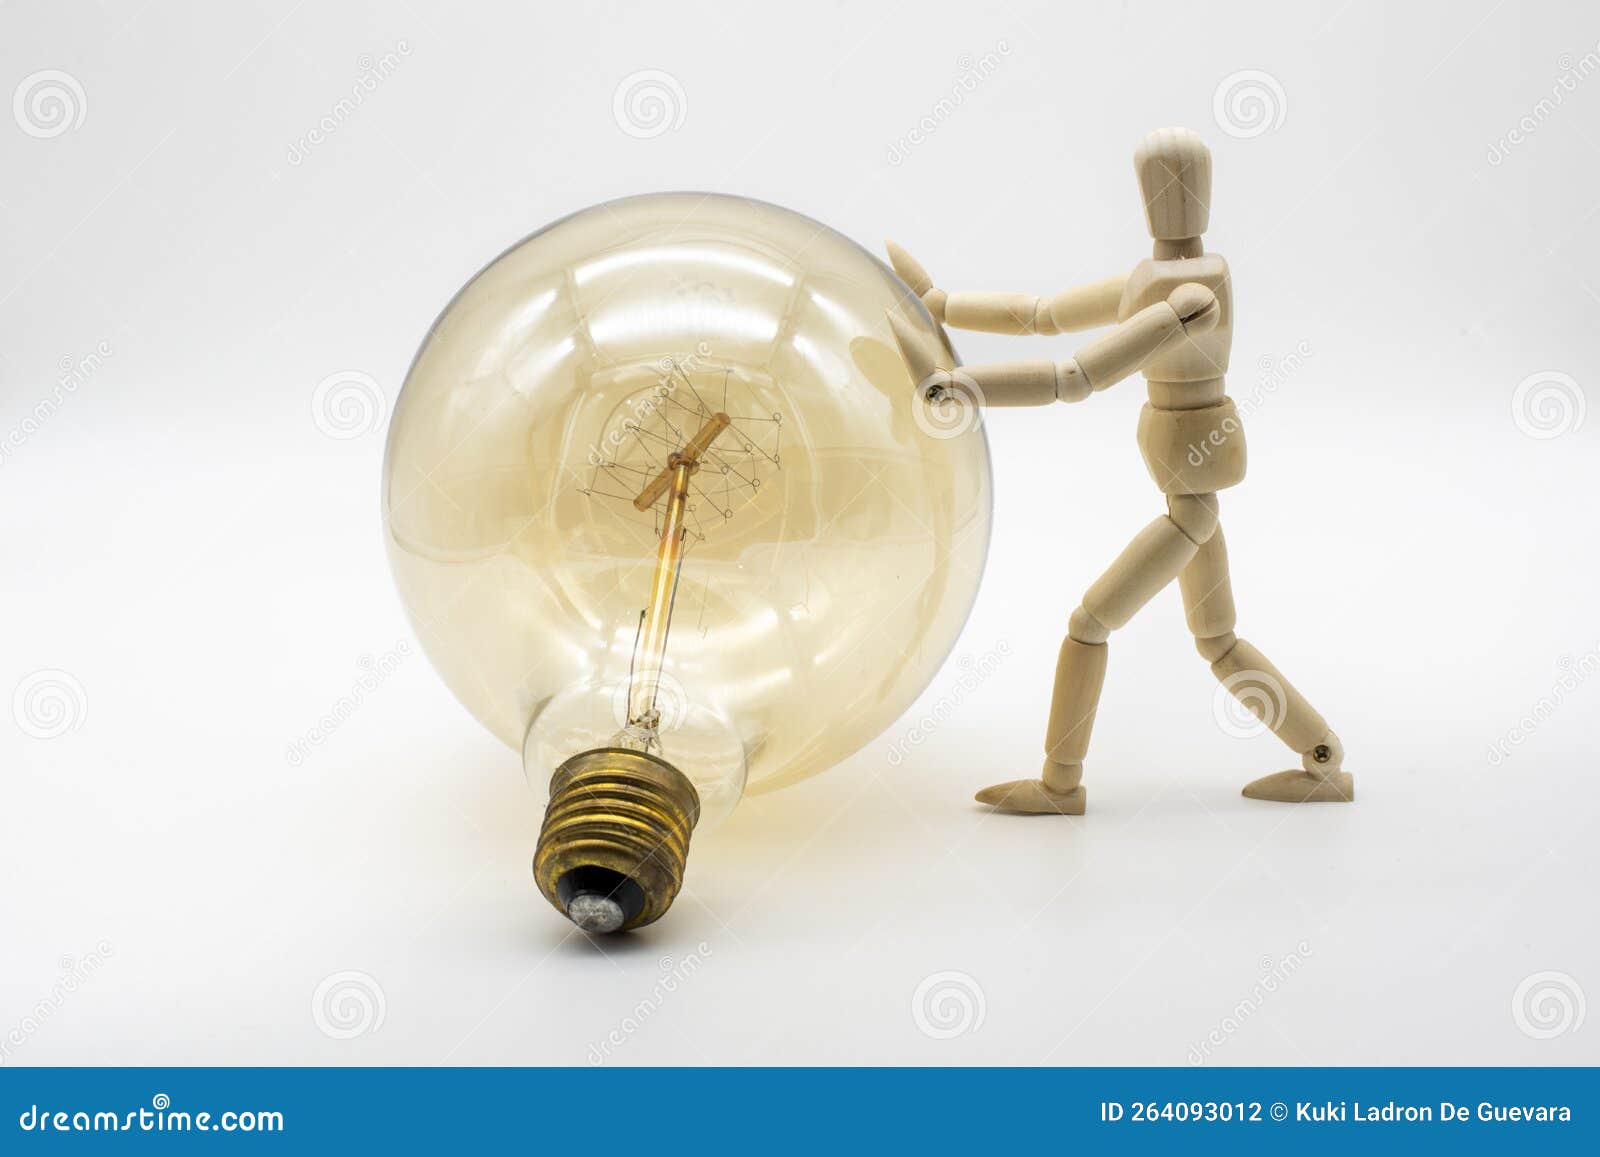 wooden mannequin pushing a electric light bulb